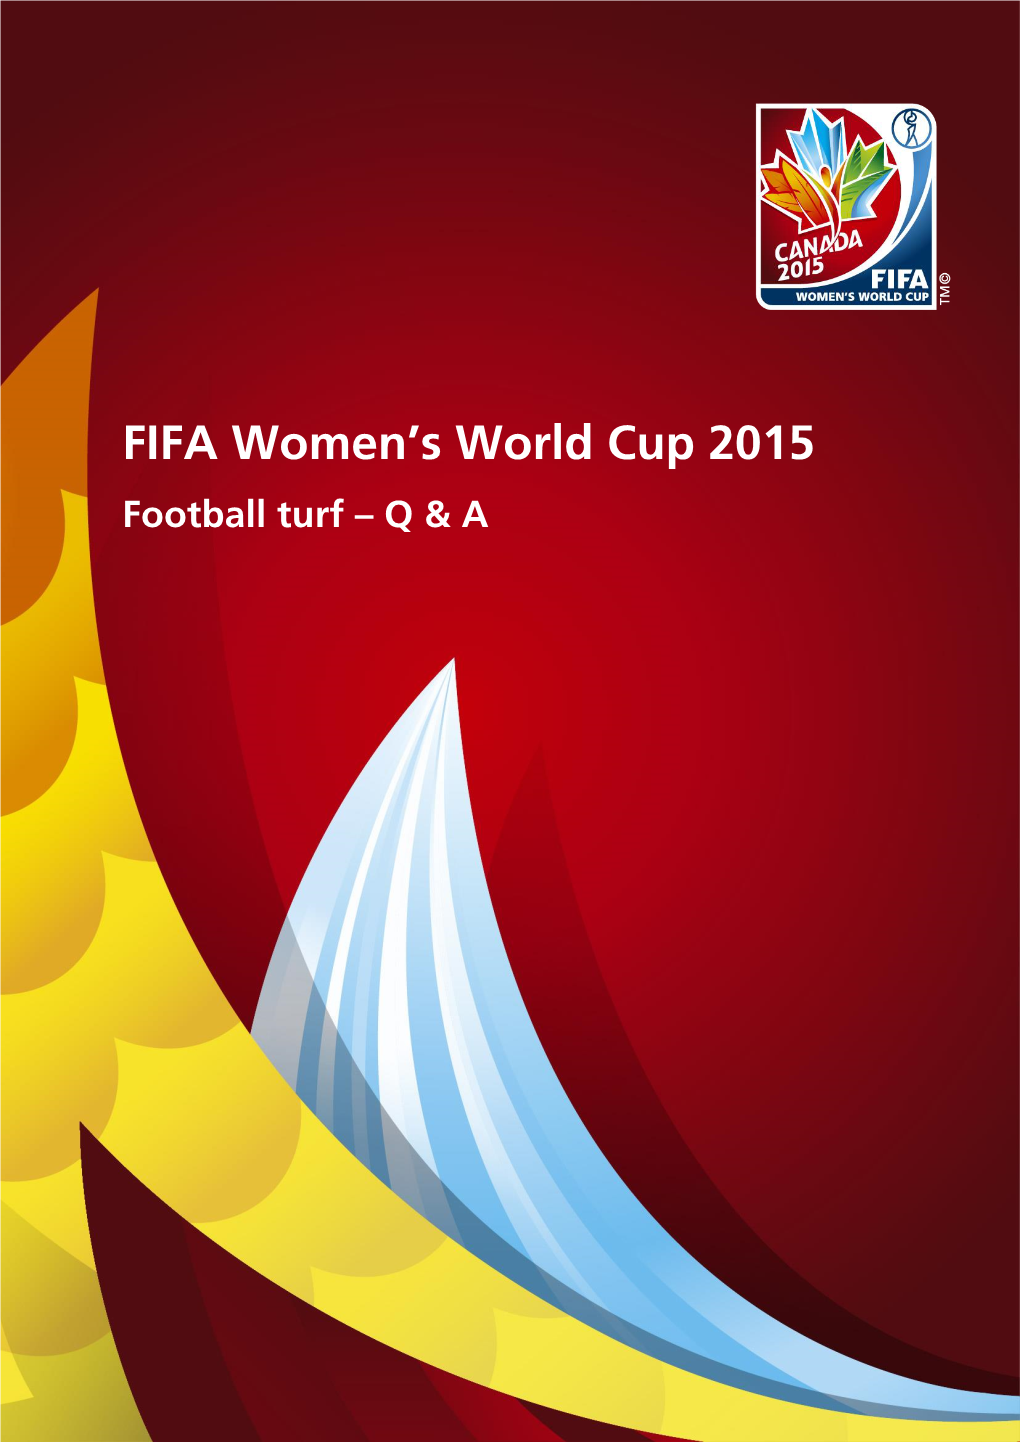 Football Turf at the FIFA Women's World Cup Canada 2015